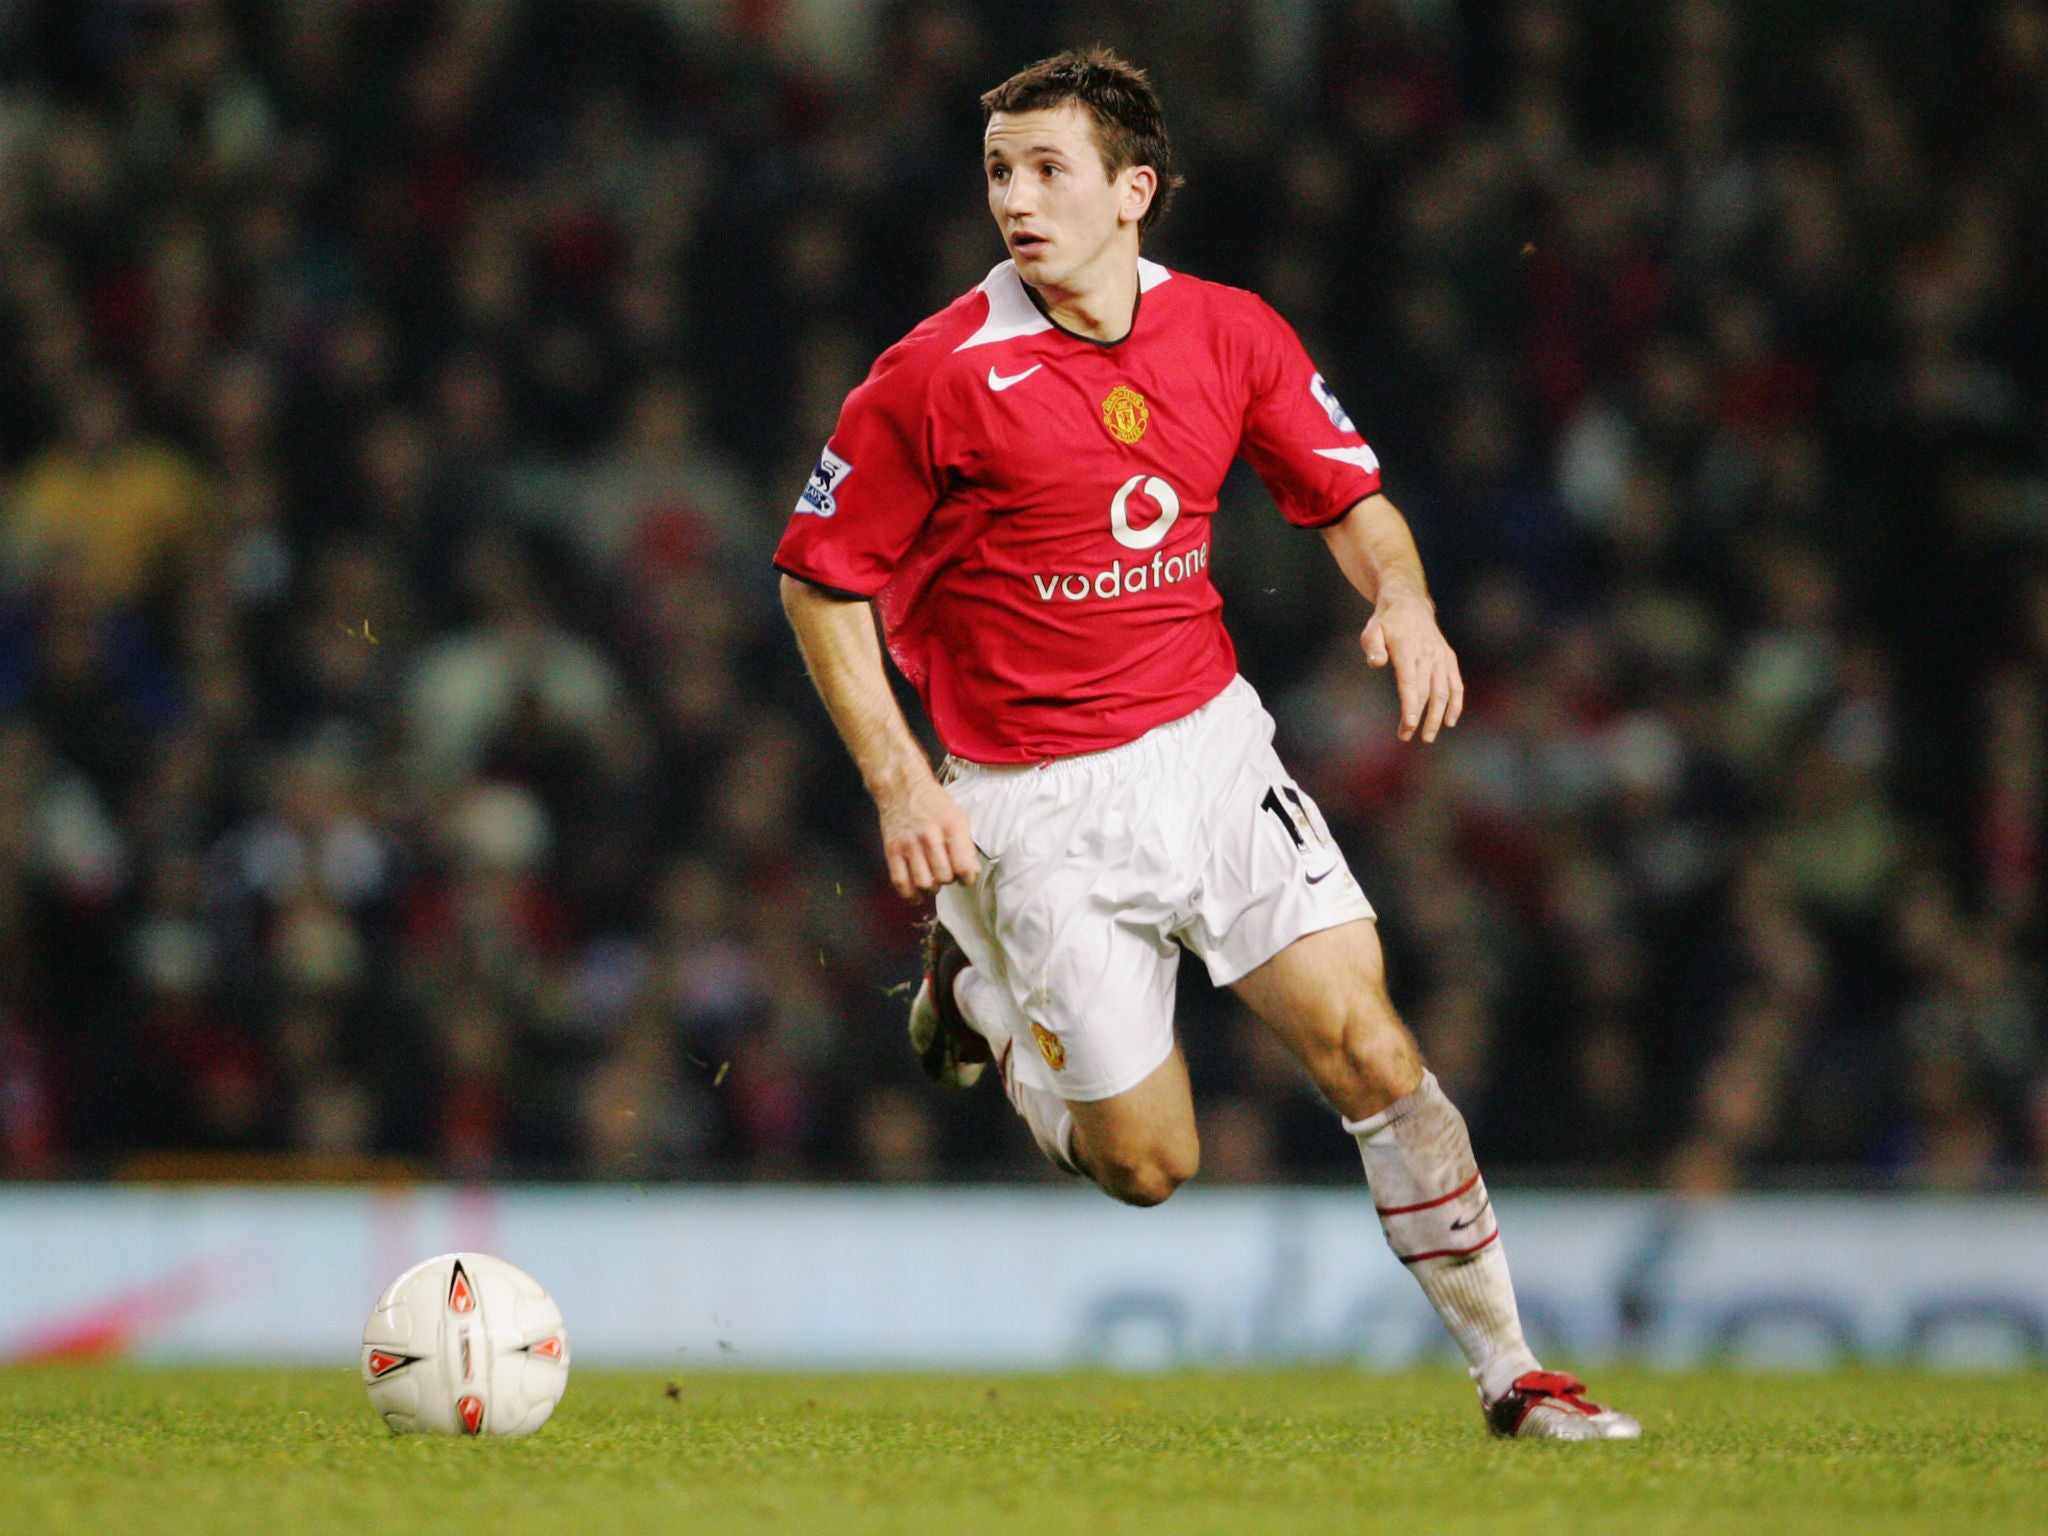 Miller made 20 appearances in two years for United